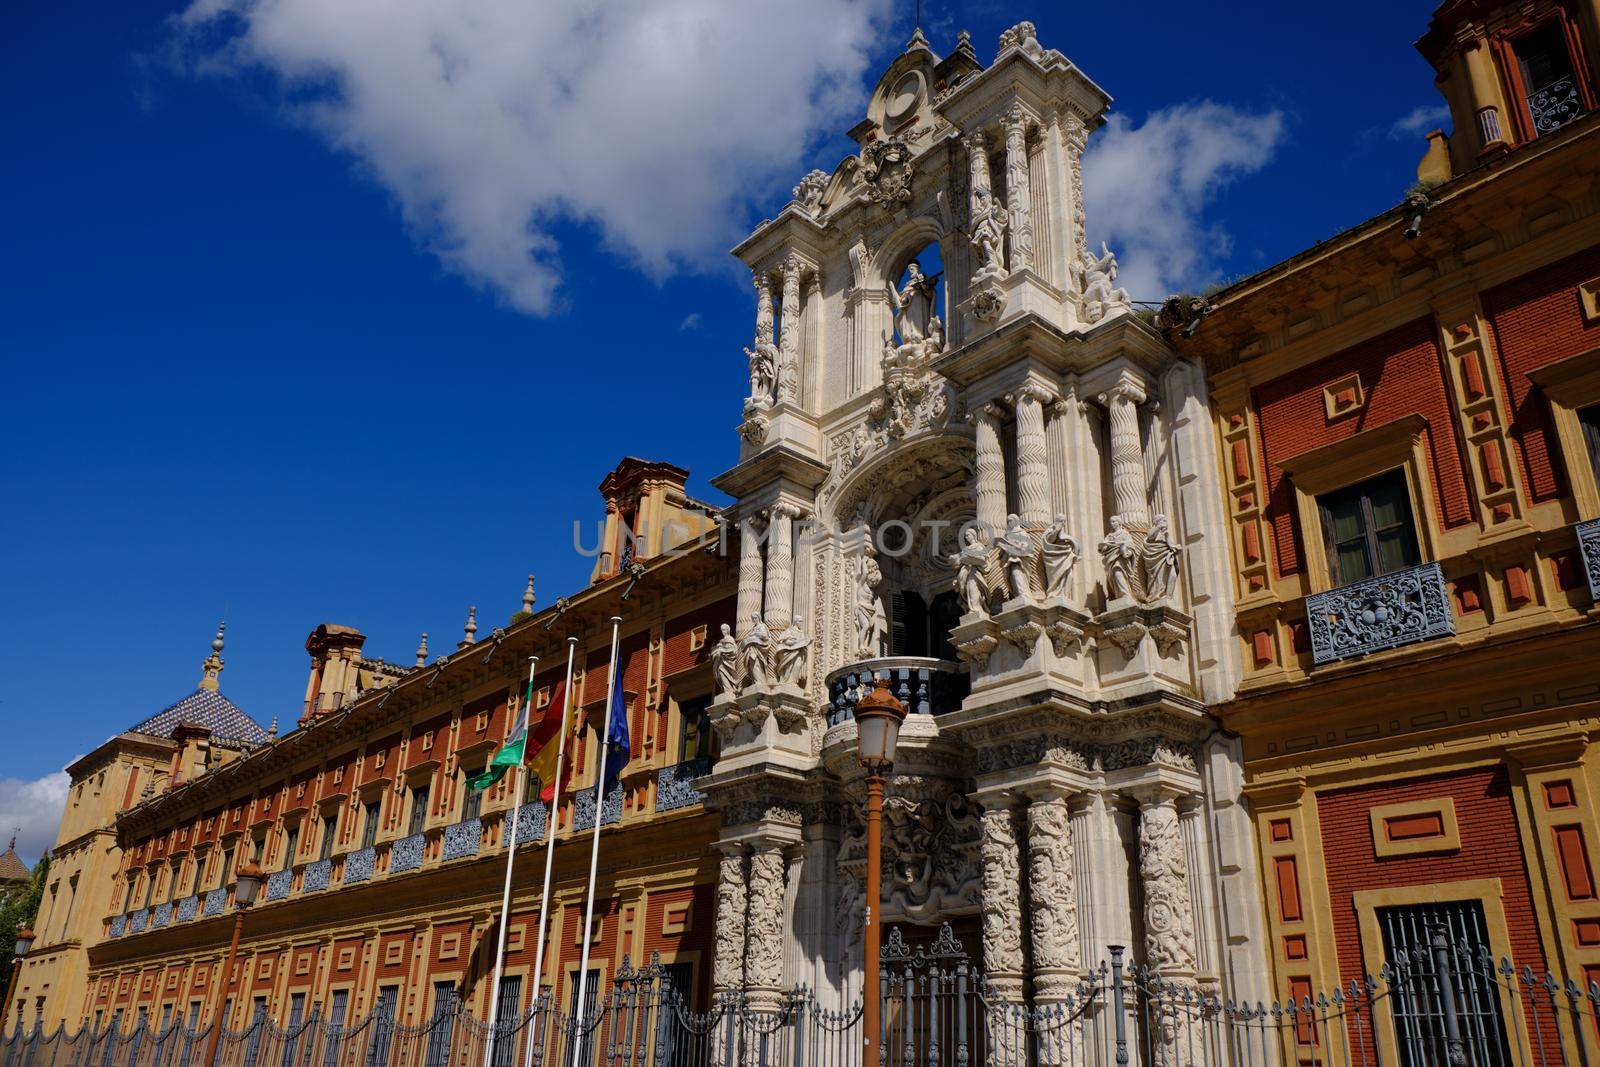 view of San Telmo Palace, Seville, Spain. Seat of the presidency in a sunny day